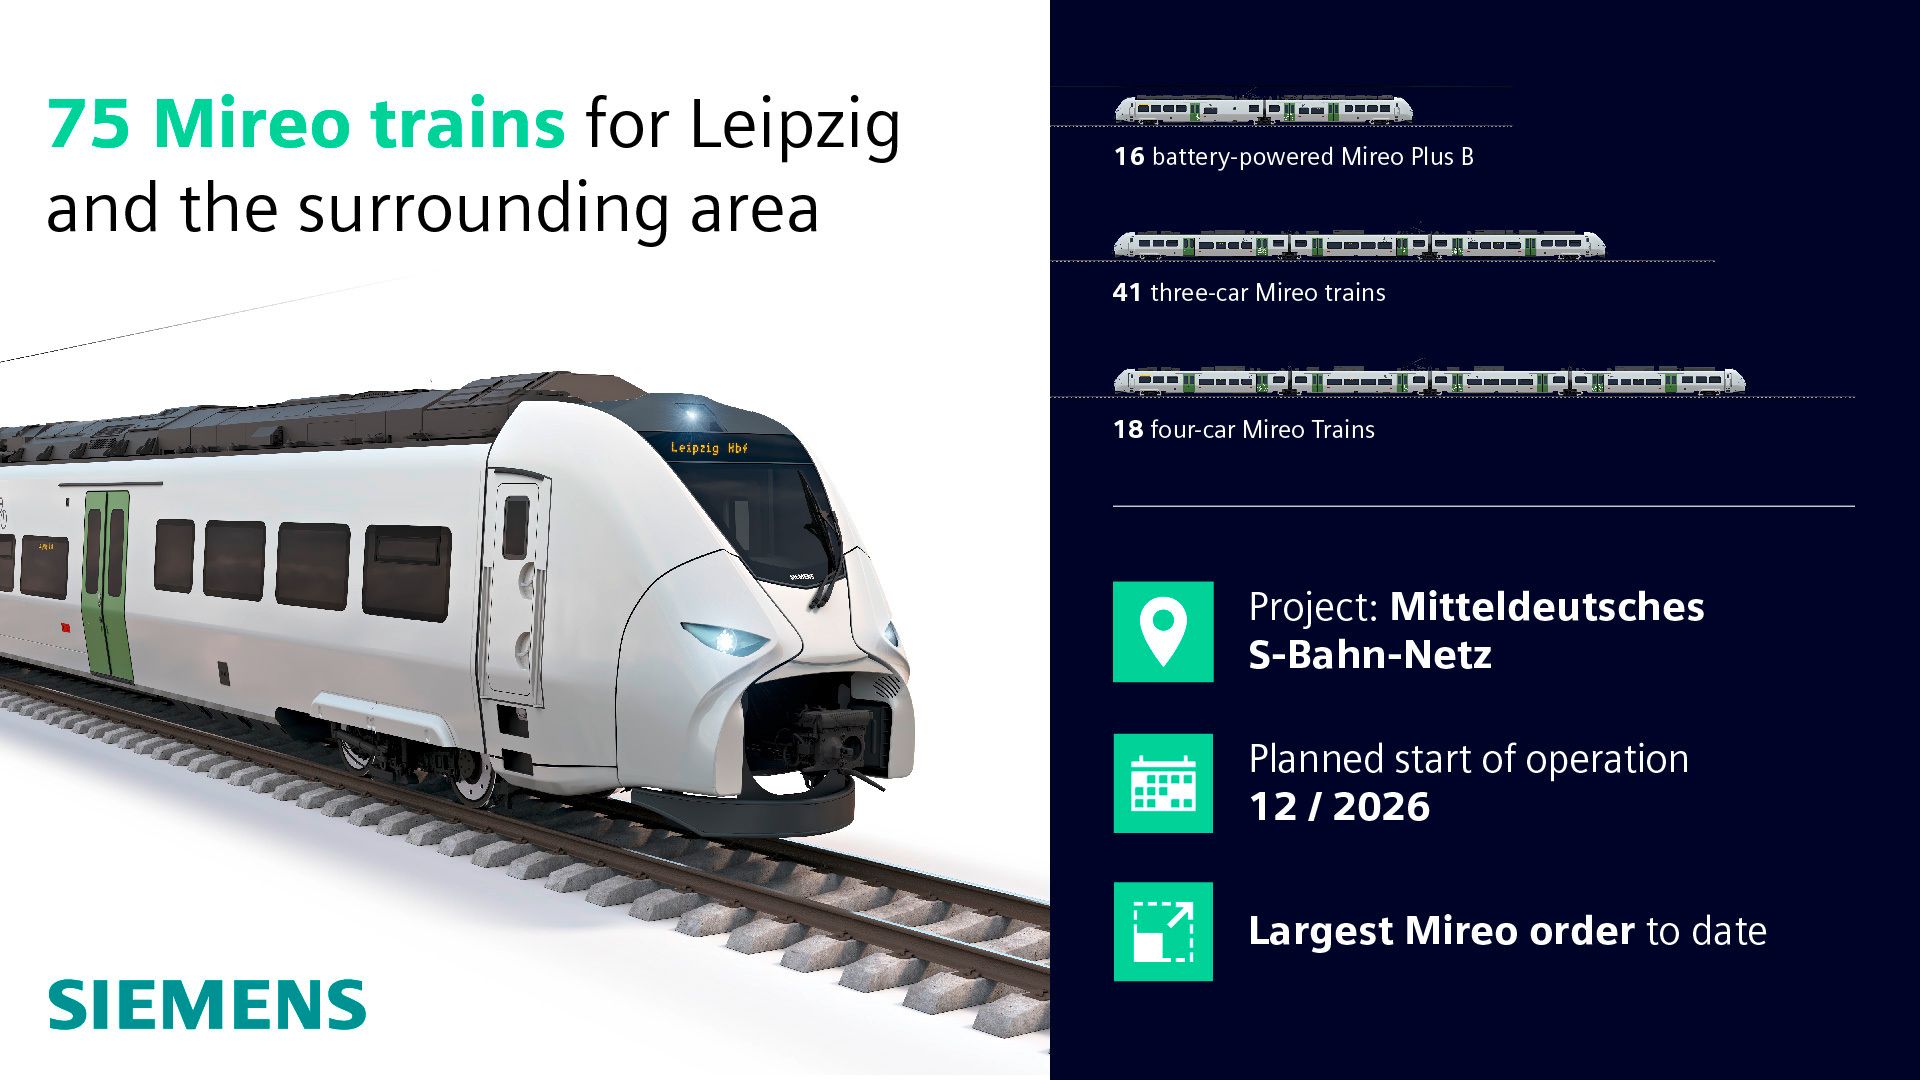 Siemens Mobility supplies 75 Mireo trains for Leipzig and the